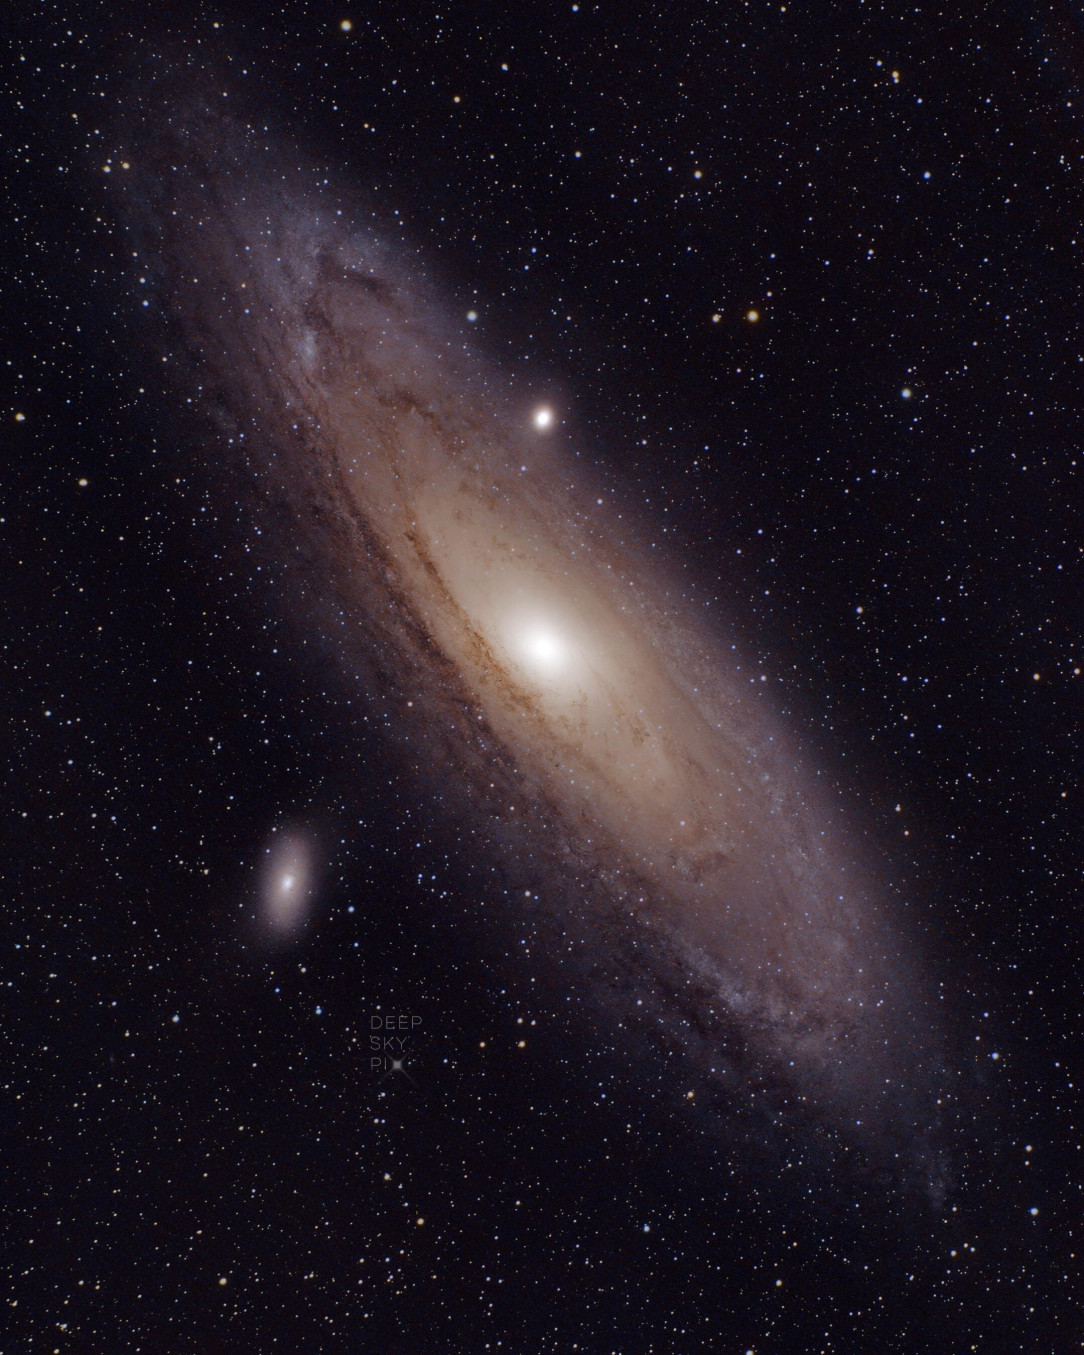 Andromeda Galaxy with a DSLR